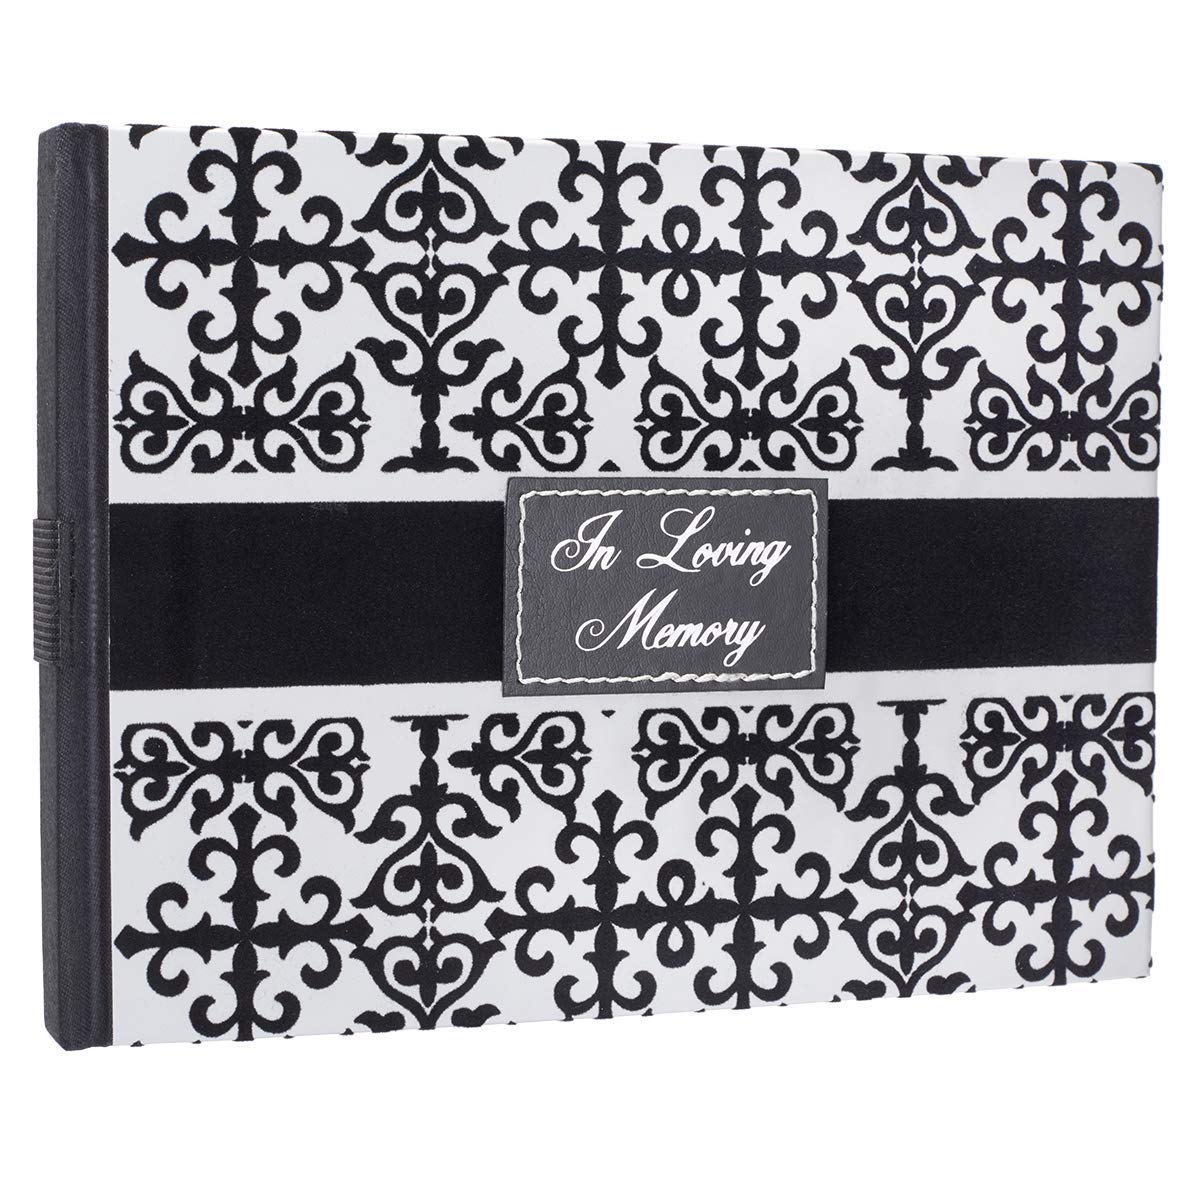 In Loving Memory Guest Book - Black and White Flocked Cover Design - Condolence Book, Funeral Guest Book, Memorial Sign-in Book for Funerals & Memorial Services